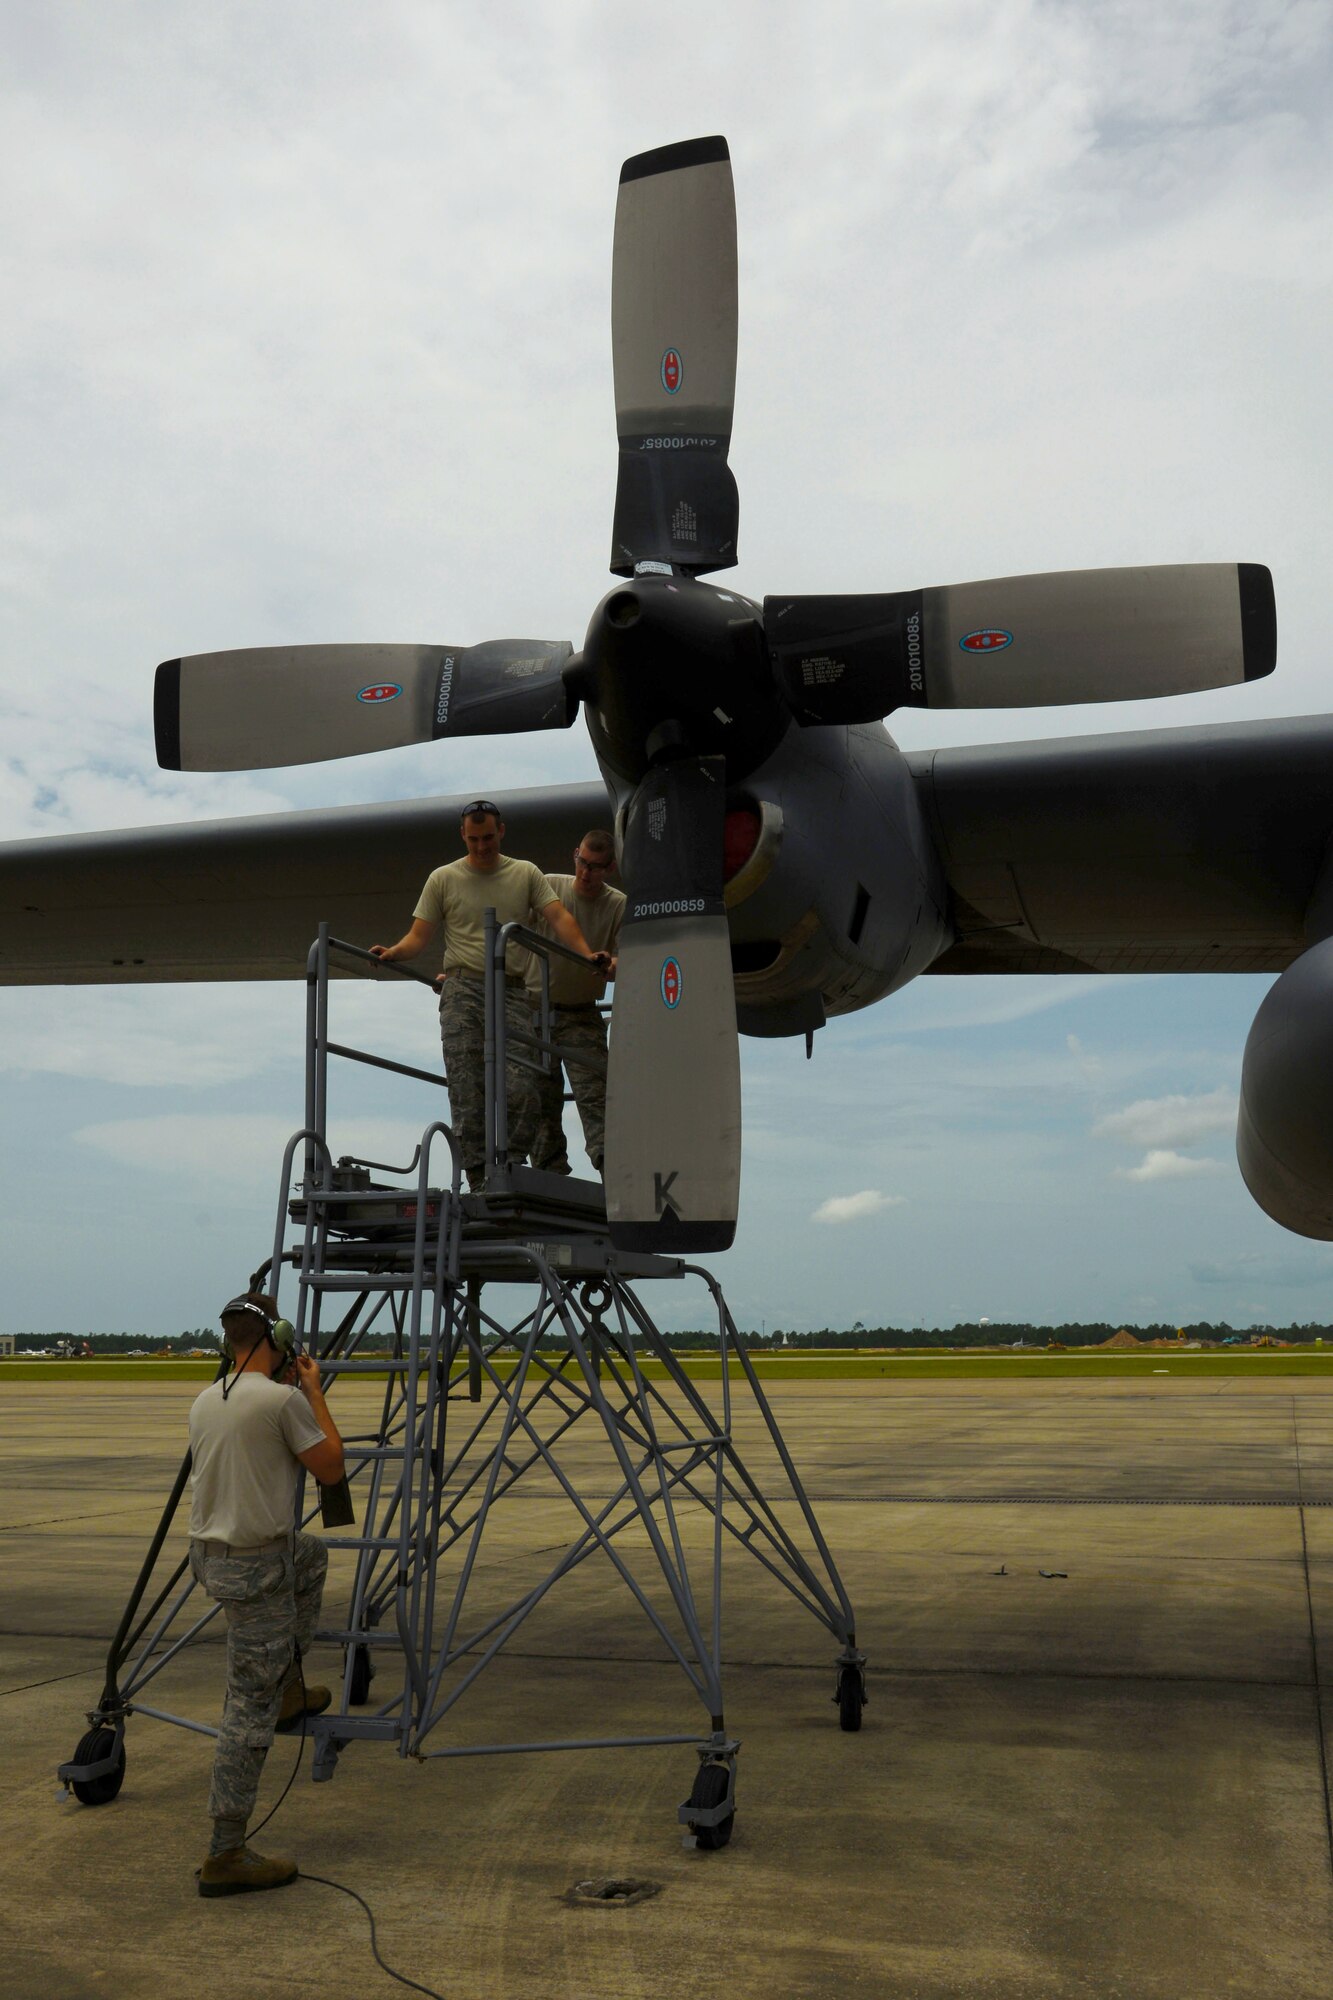 Senior Airman Nick Dill (foreground), Senior Airman Collin Nelson (middle), and Senior Airman Zack Sabluk (rear), of the 103rd Maintenance Squadron, prepare to inspect an access panel on a C-130H prop as part of a scheduled aircraft inspection.  Aircraft maintainers with the Connecticut Air National Guard are training alongside their counterparts from the Kentucky Air National Guard while deployed to the Combat Readiness Training Center, Gulfport, Miss., June 25, 2014.  (U.S. Air National Guard photo by Senior Airman Jennifer Pierce)